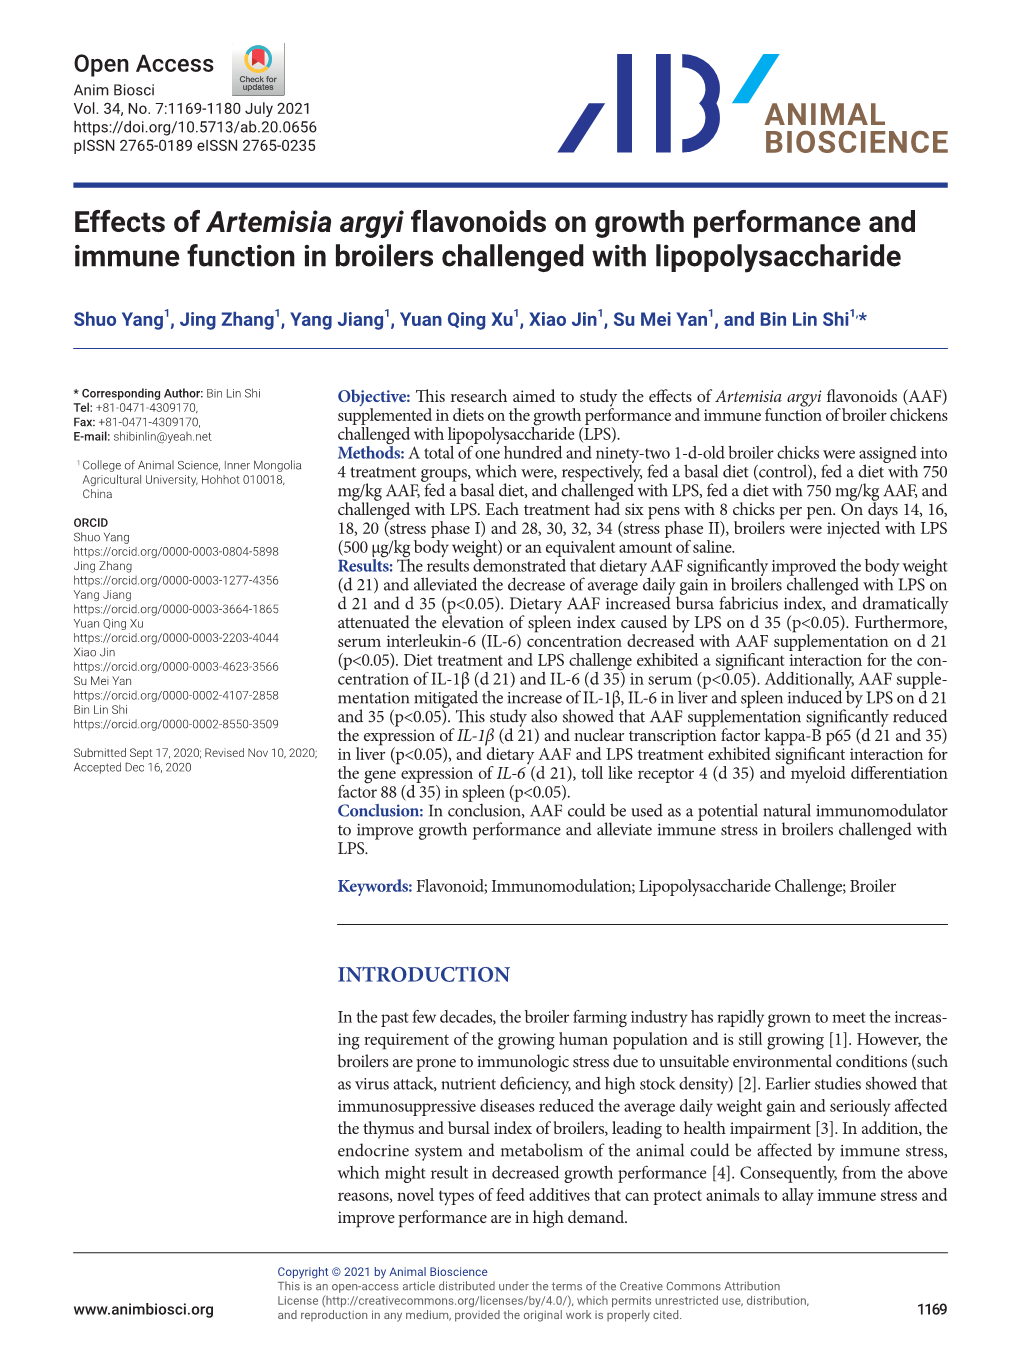 Effects of Artemisia Argyi Flavonoids on Growth Performance and Immune Function in Broilers Challenged with Lipopolysaccharide